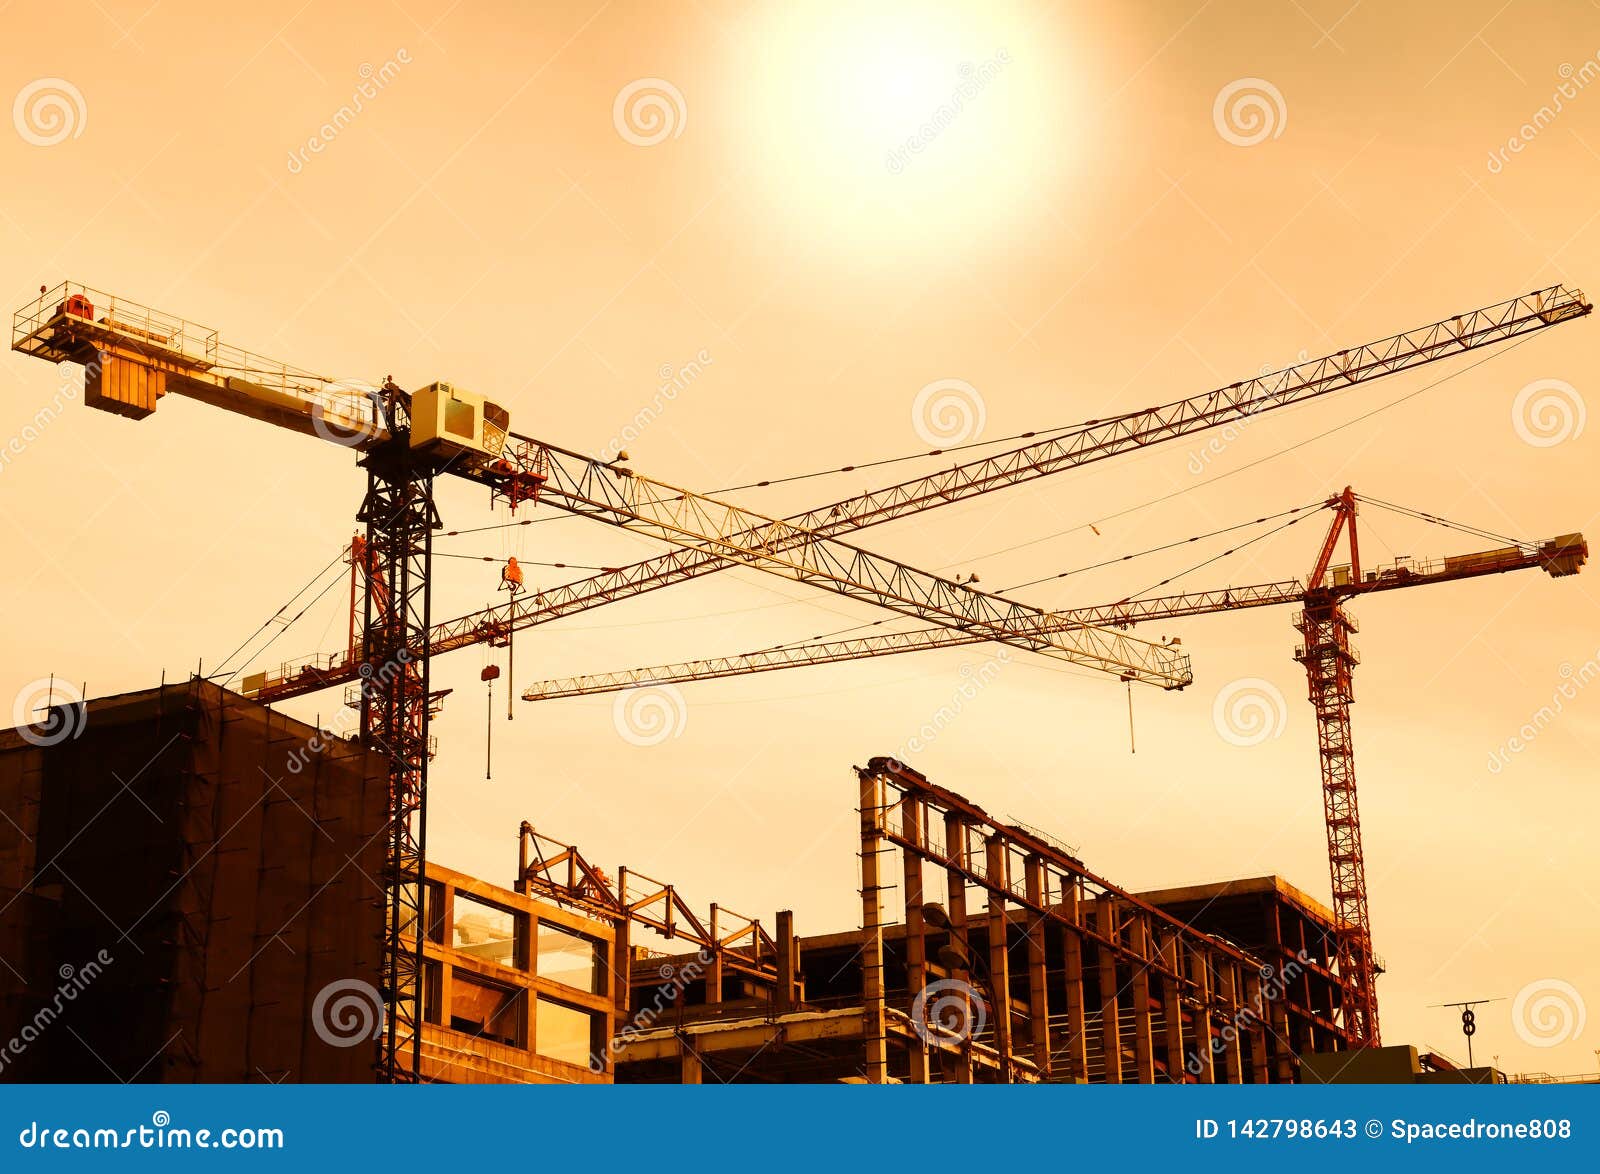  Construction  Site  Two Cranes Background  Stock Image 